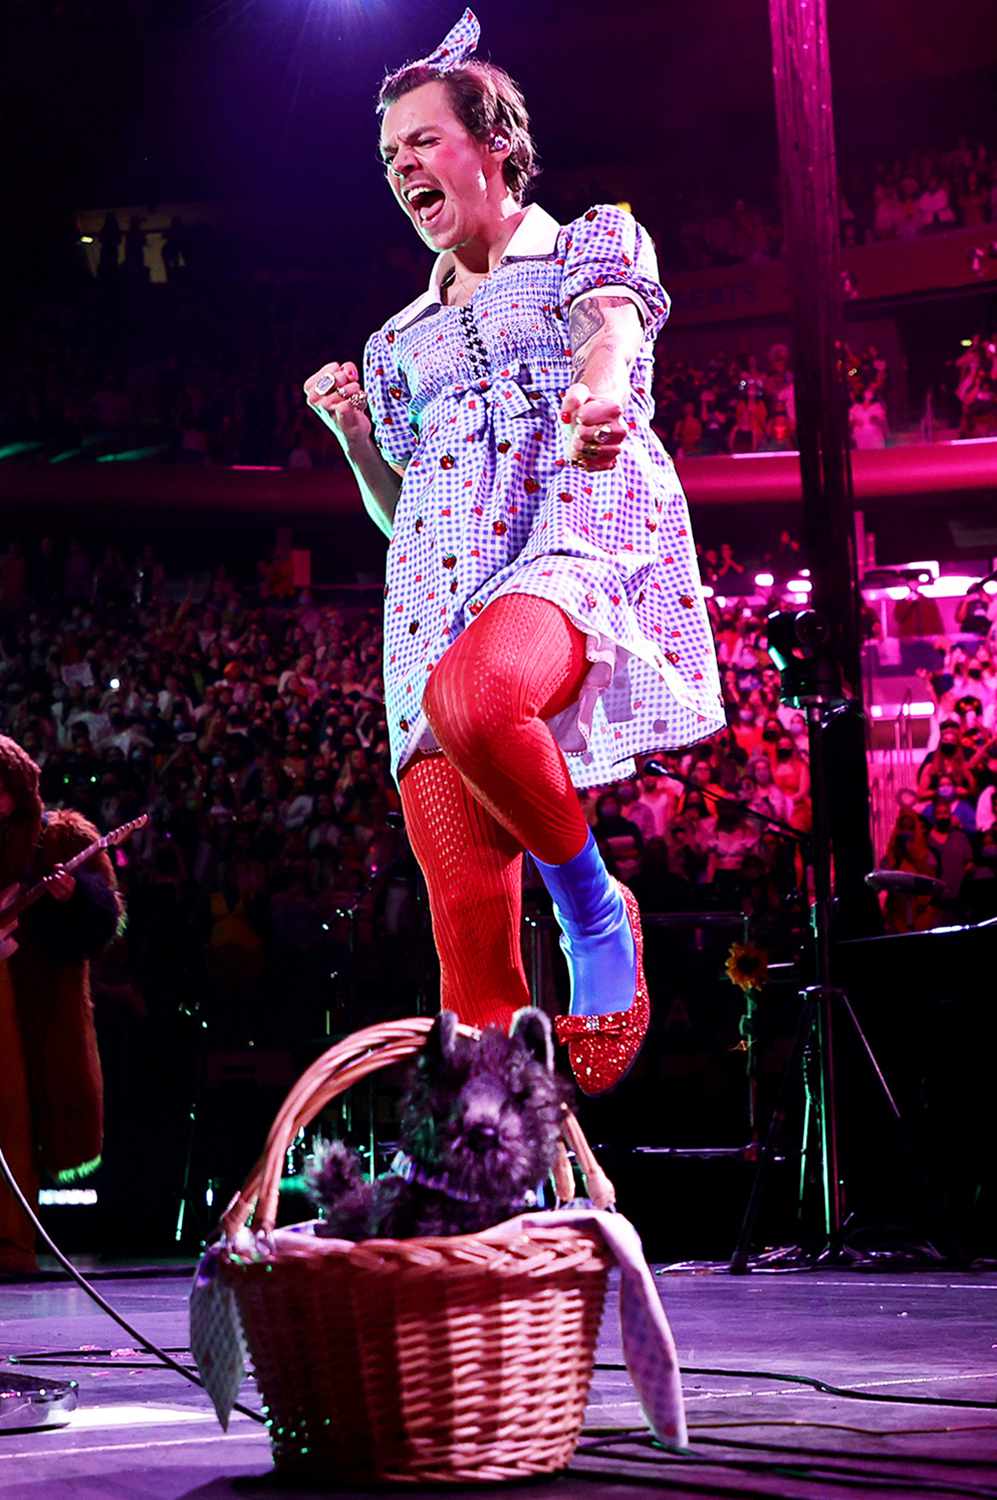 Harry Styles performs, in Dorothy from "The Wizard of Oz" costume, with Toto dog onstage at Harry Styles "Harryween" Fancy Dress Party at Madison Square Garden on October 30, 2021 in New York City.